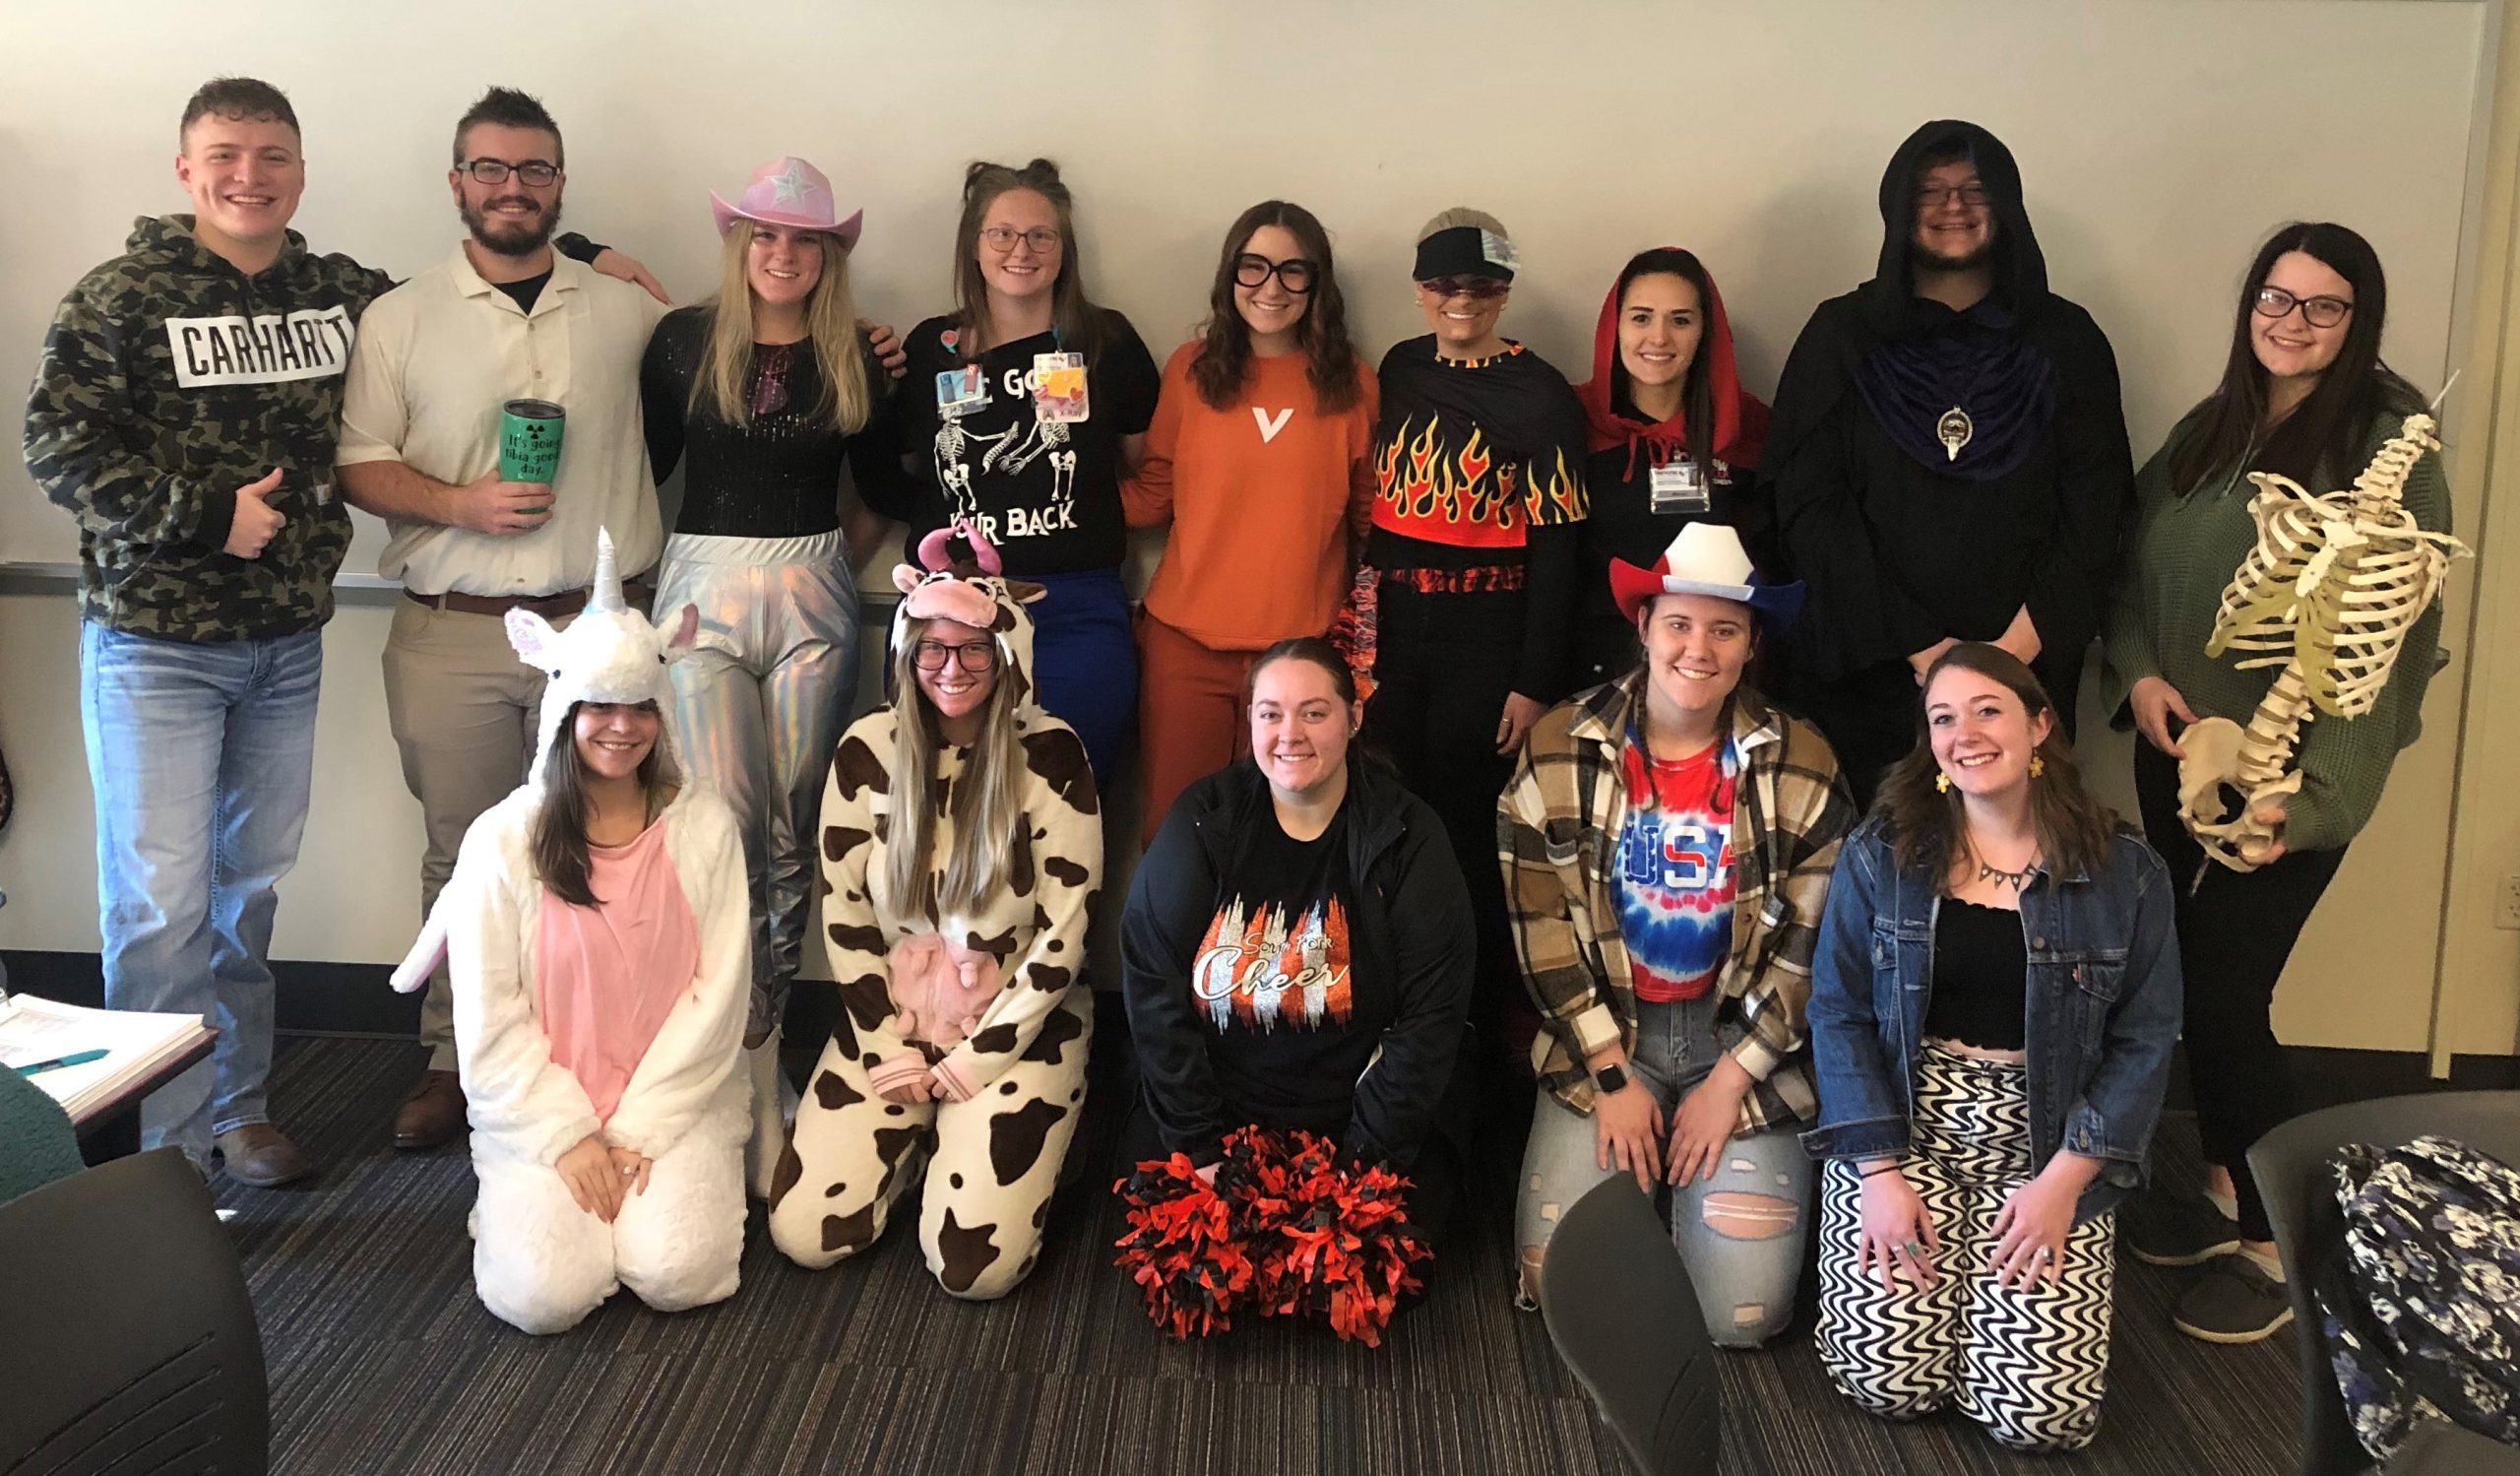 Radiography students in Halloween costumes